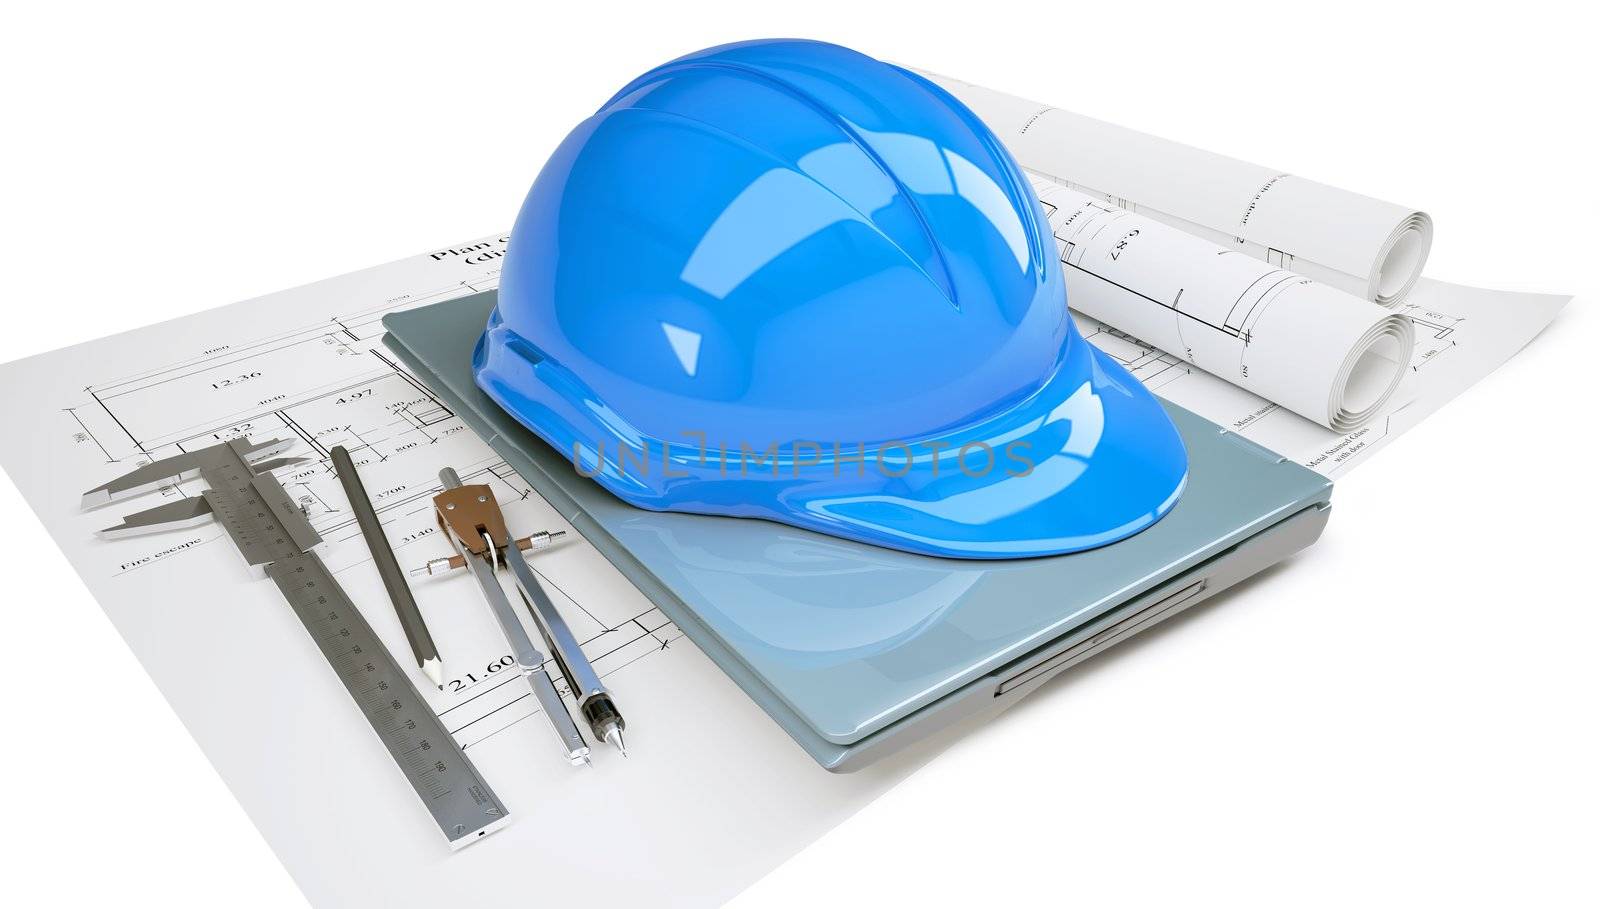 Construction helmet and laptop in the drawings. Isolated on white background